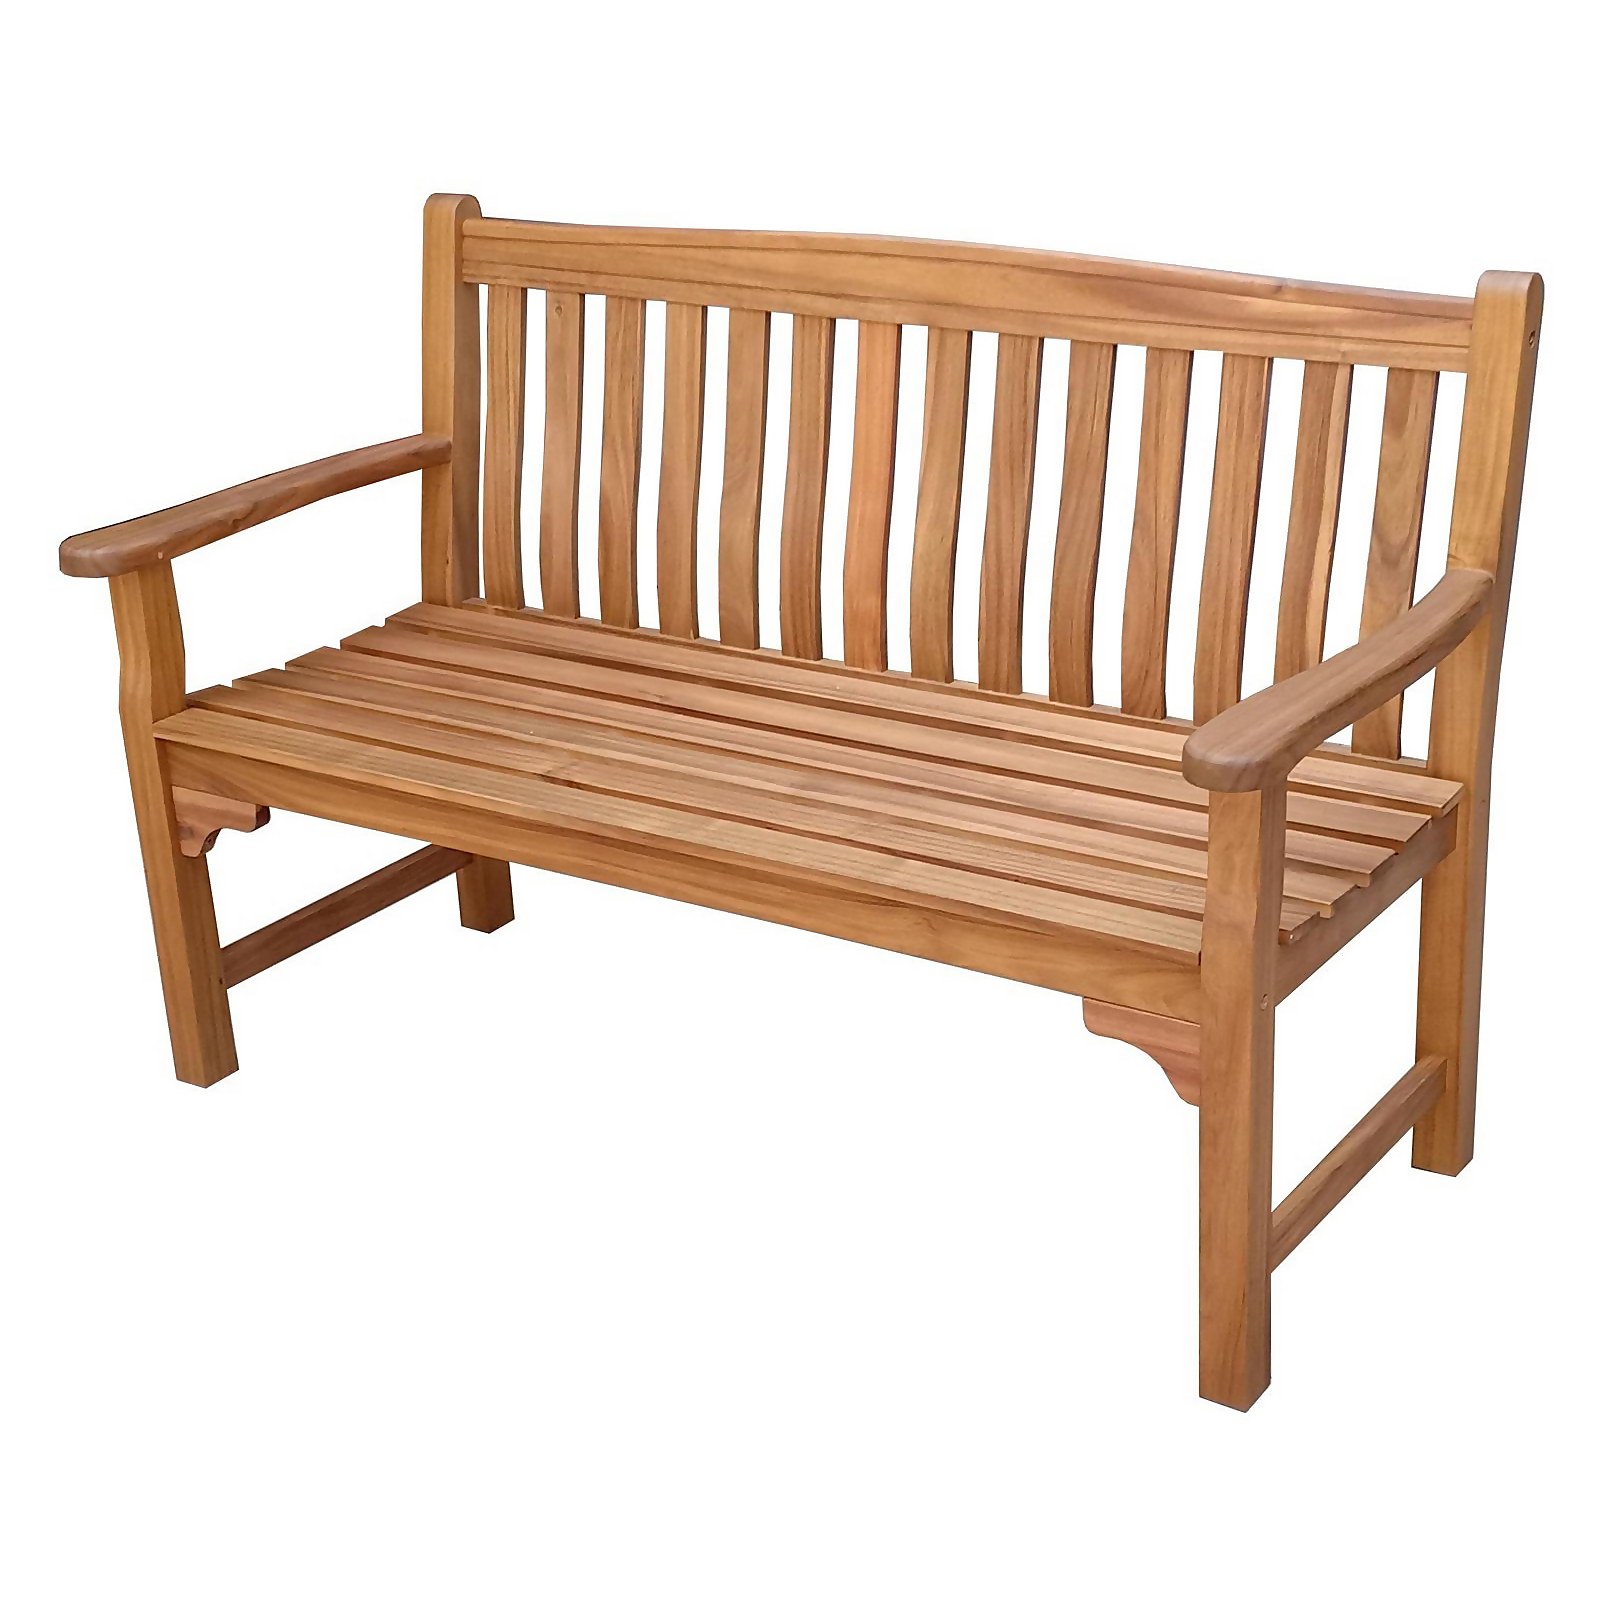 Photo of Hungate 2 Seater Garden Bench